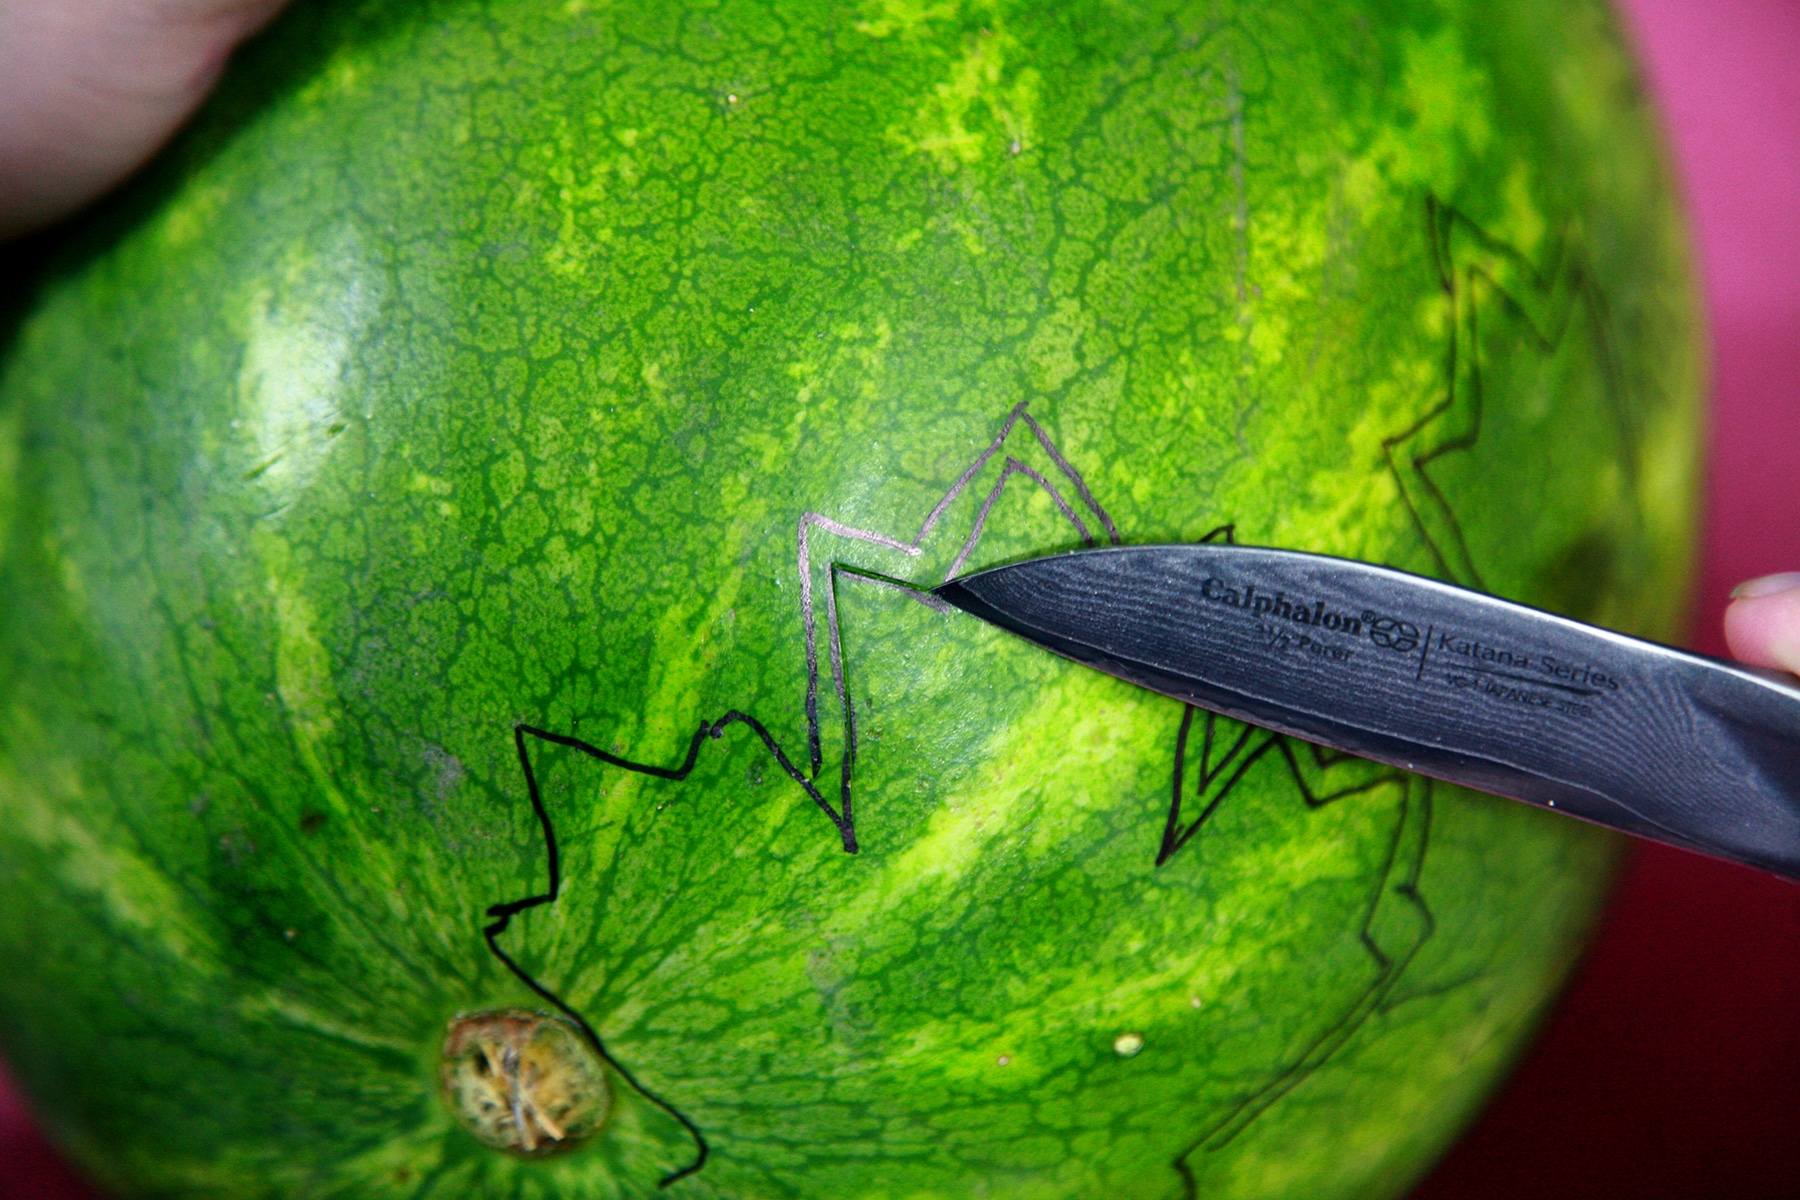 The tip of a paring knife is being used to trace the design drawn on the watermelon.